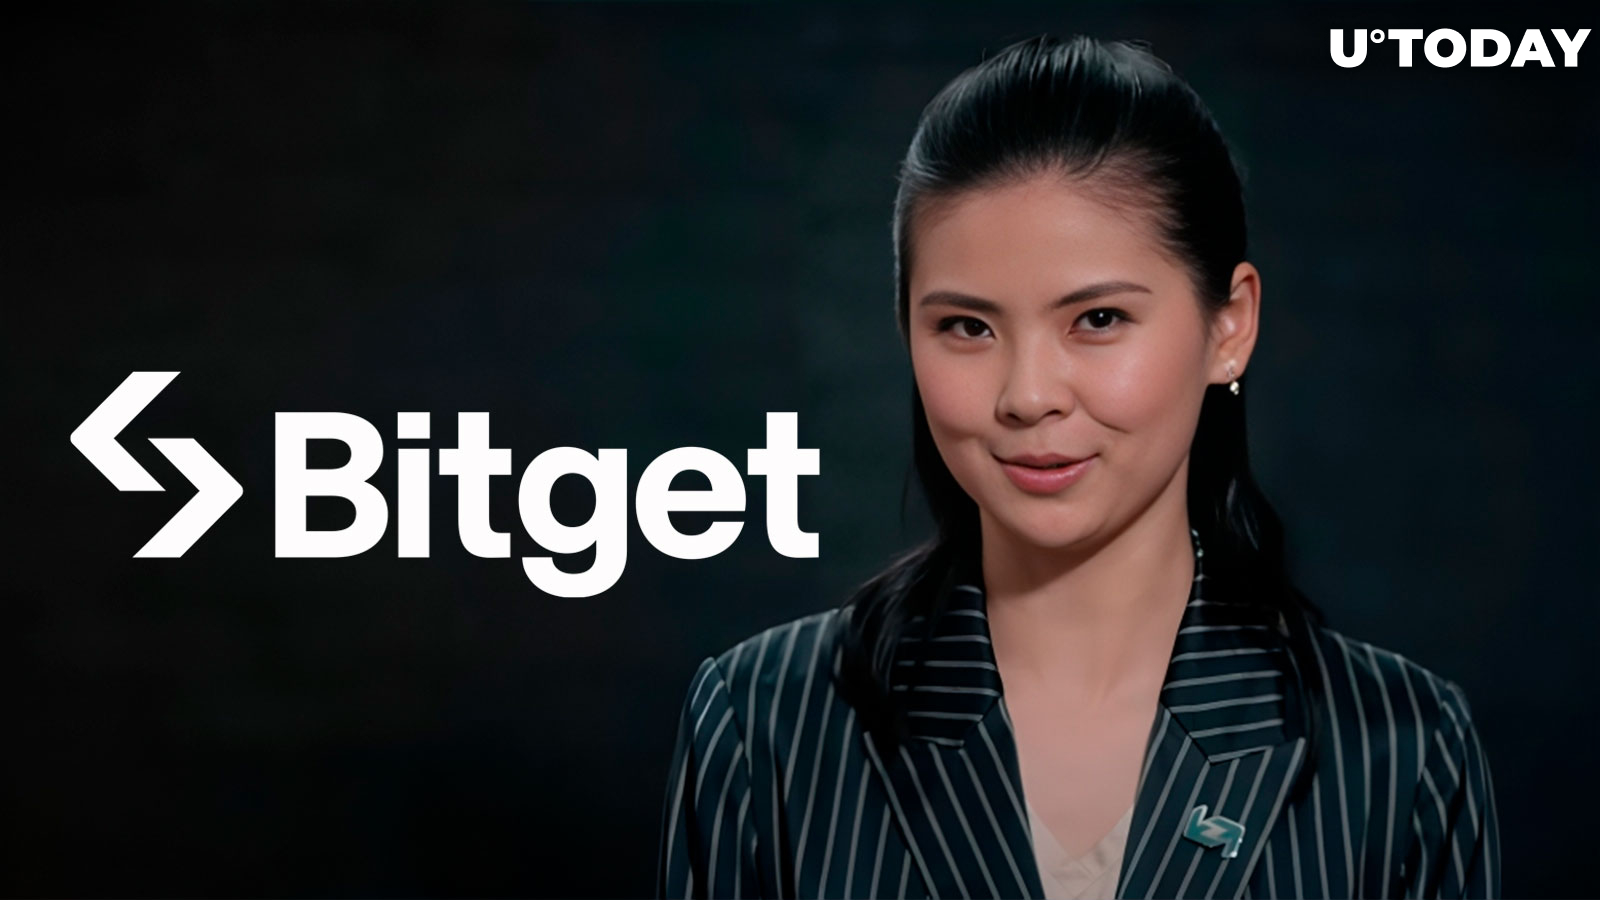 Bitget to Participate in UN Women's Commission on the Status of Women